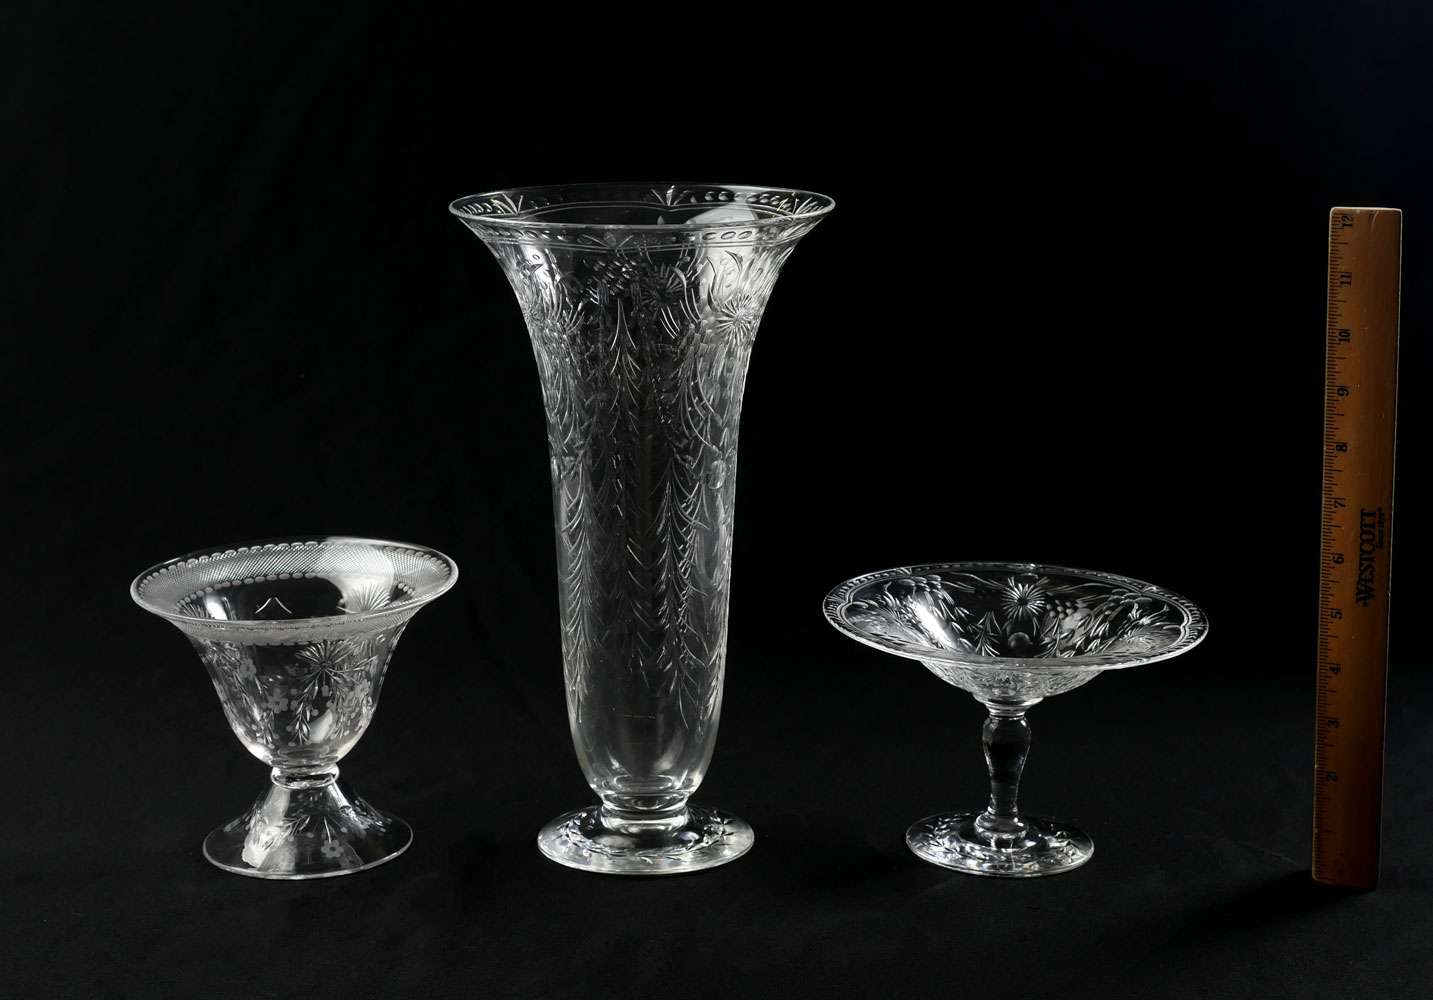 3 PC PAIRPOINT ENGRAVED GLASS VASE